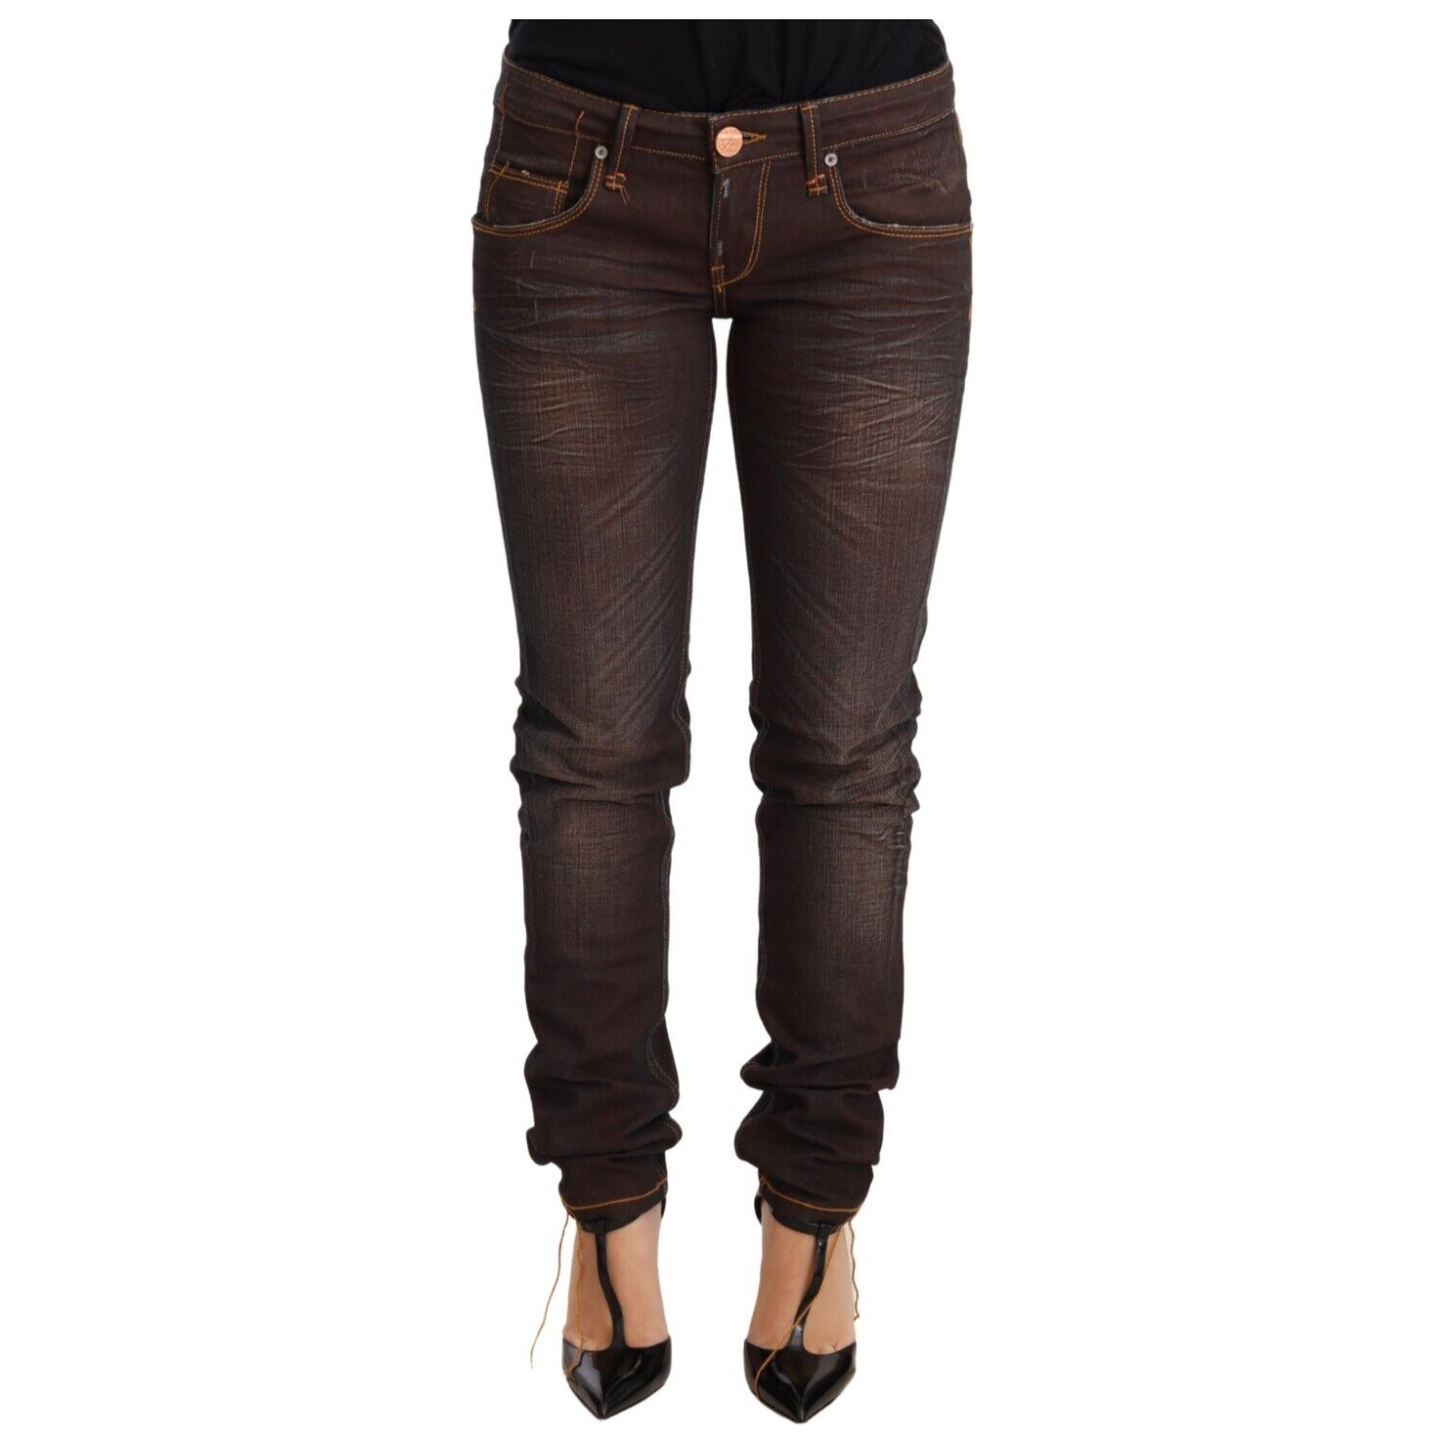 Acht Chic Low Waist Skinny Brown Jeans brown-washed-cotton-slim-fit-denim-low-waist-trouser-jeans Jeans & Pants s-l1600-25-a8323a50-a98.png